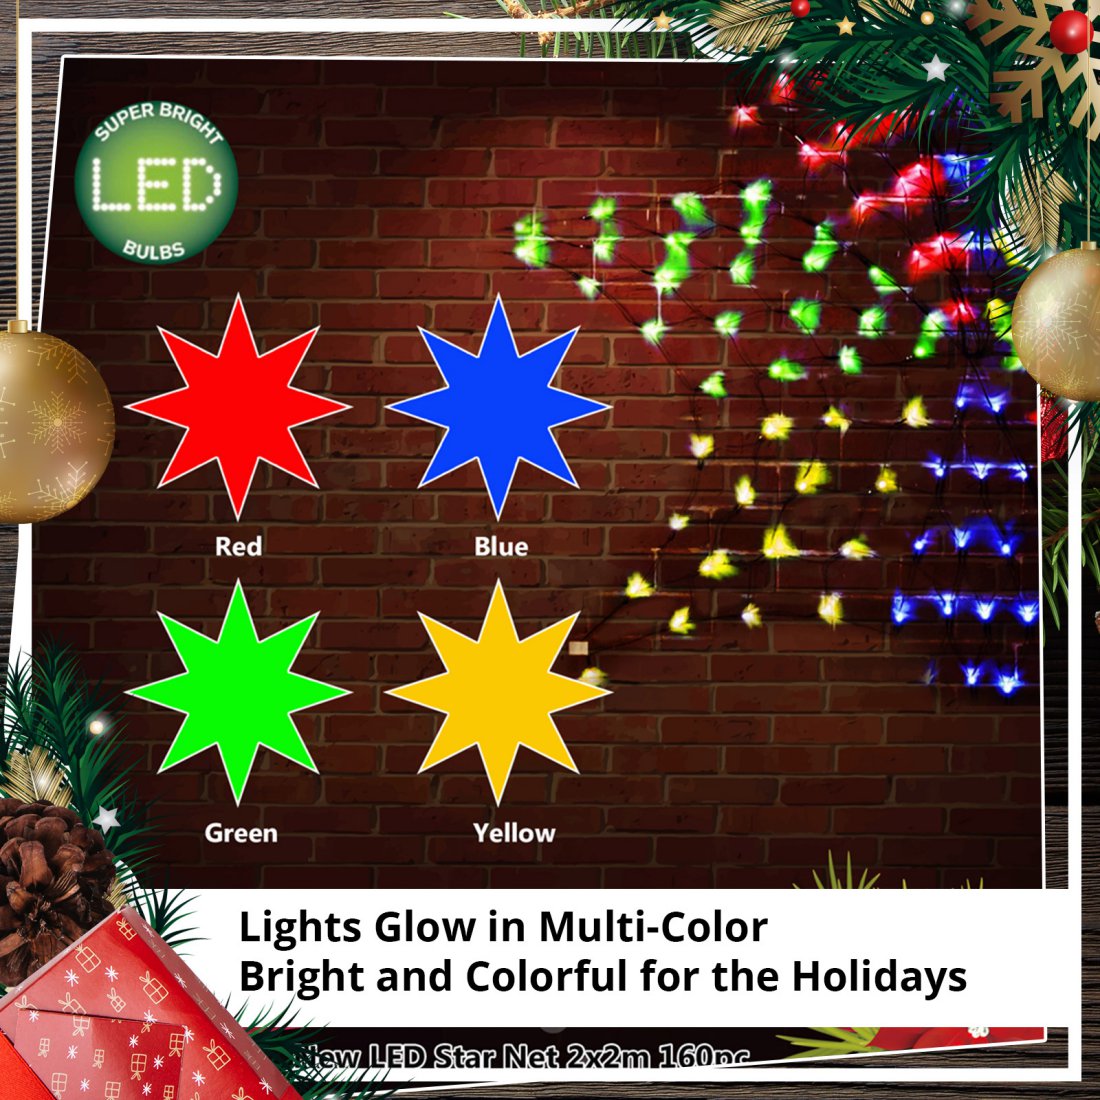 Outdoor LED Star Net 2x2m 160pc Multicoloured Christmas Lights Display